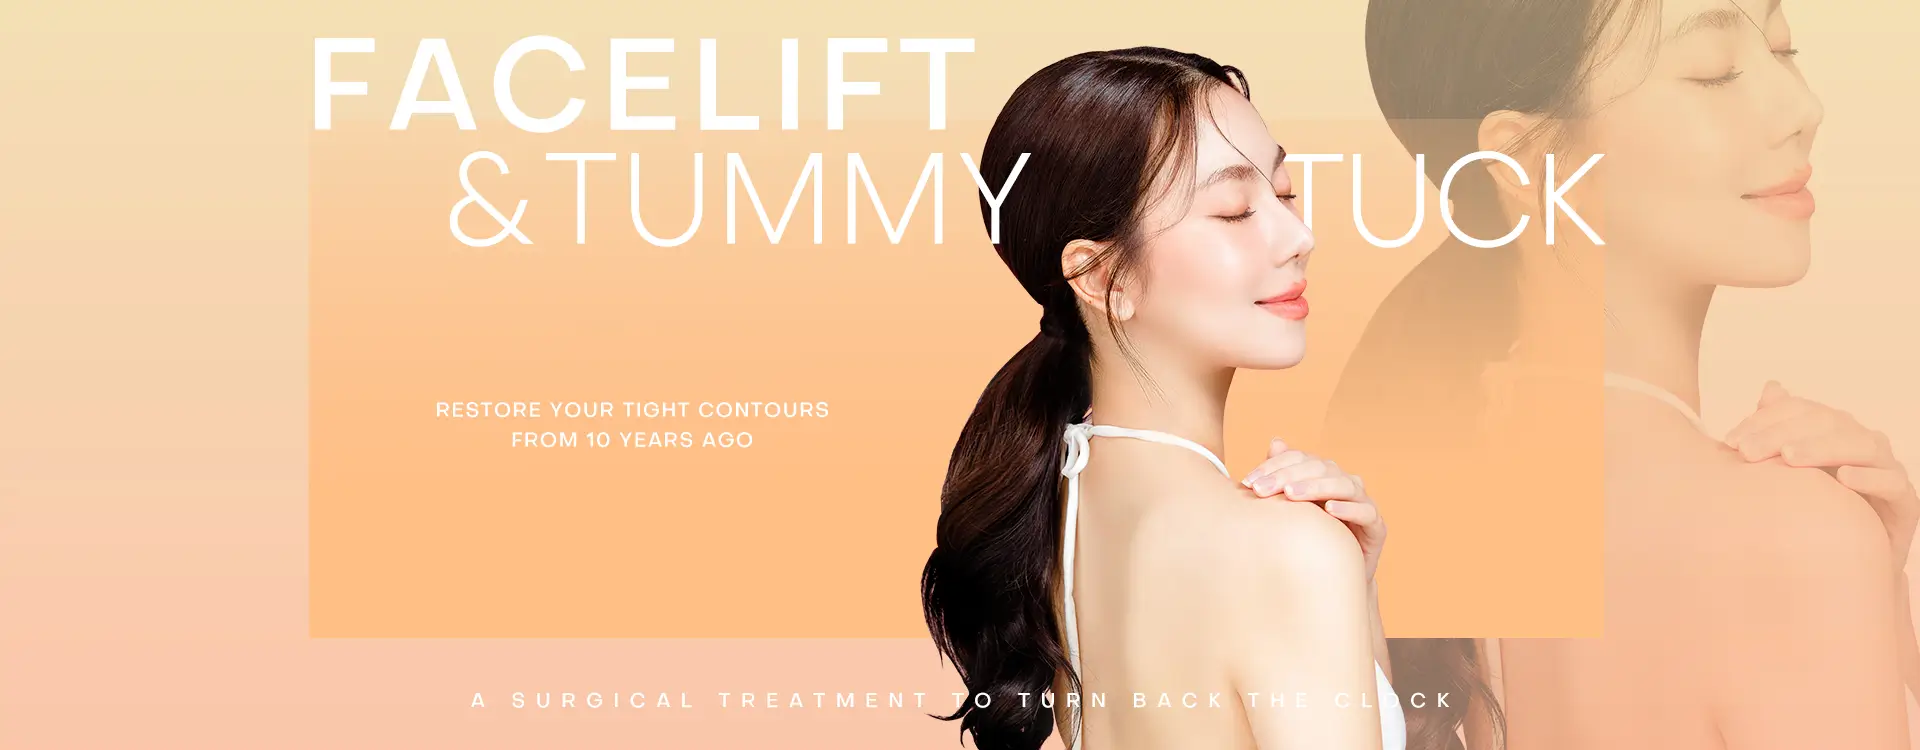 Facelift Surgery - Restore Your Tight Contours from 10 Years Ago